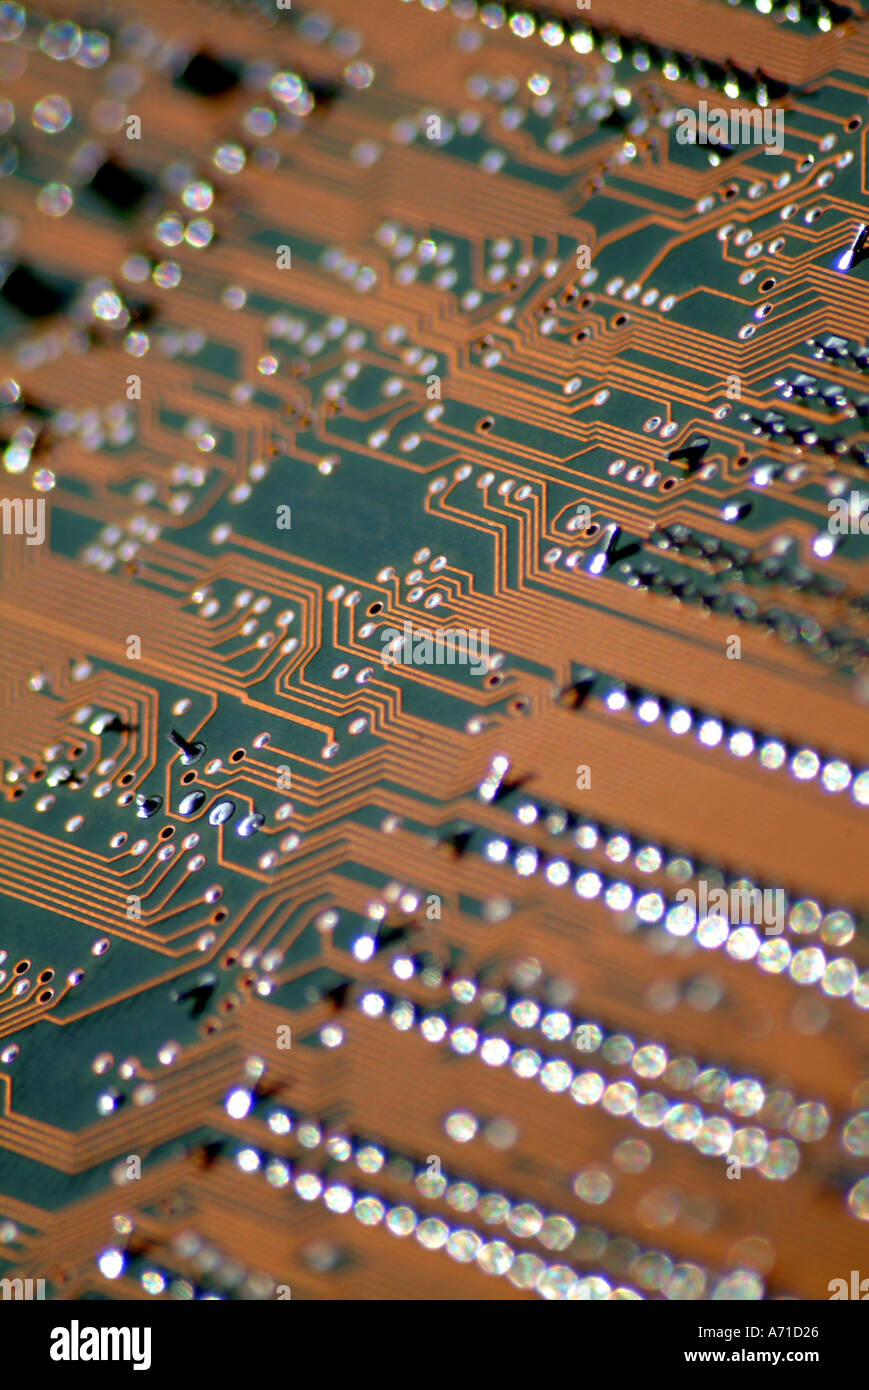 detail of computer printed circuit board Stock Photo